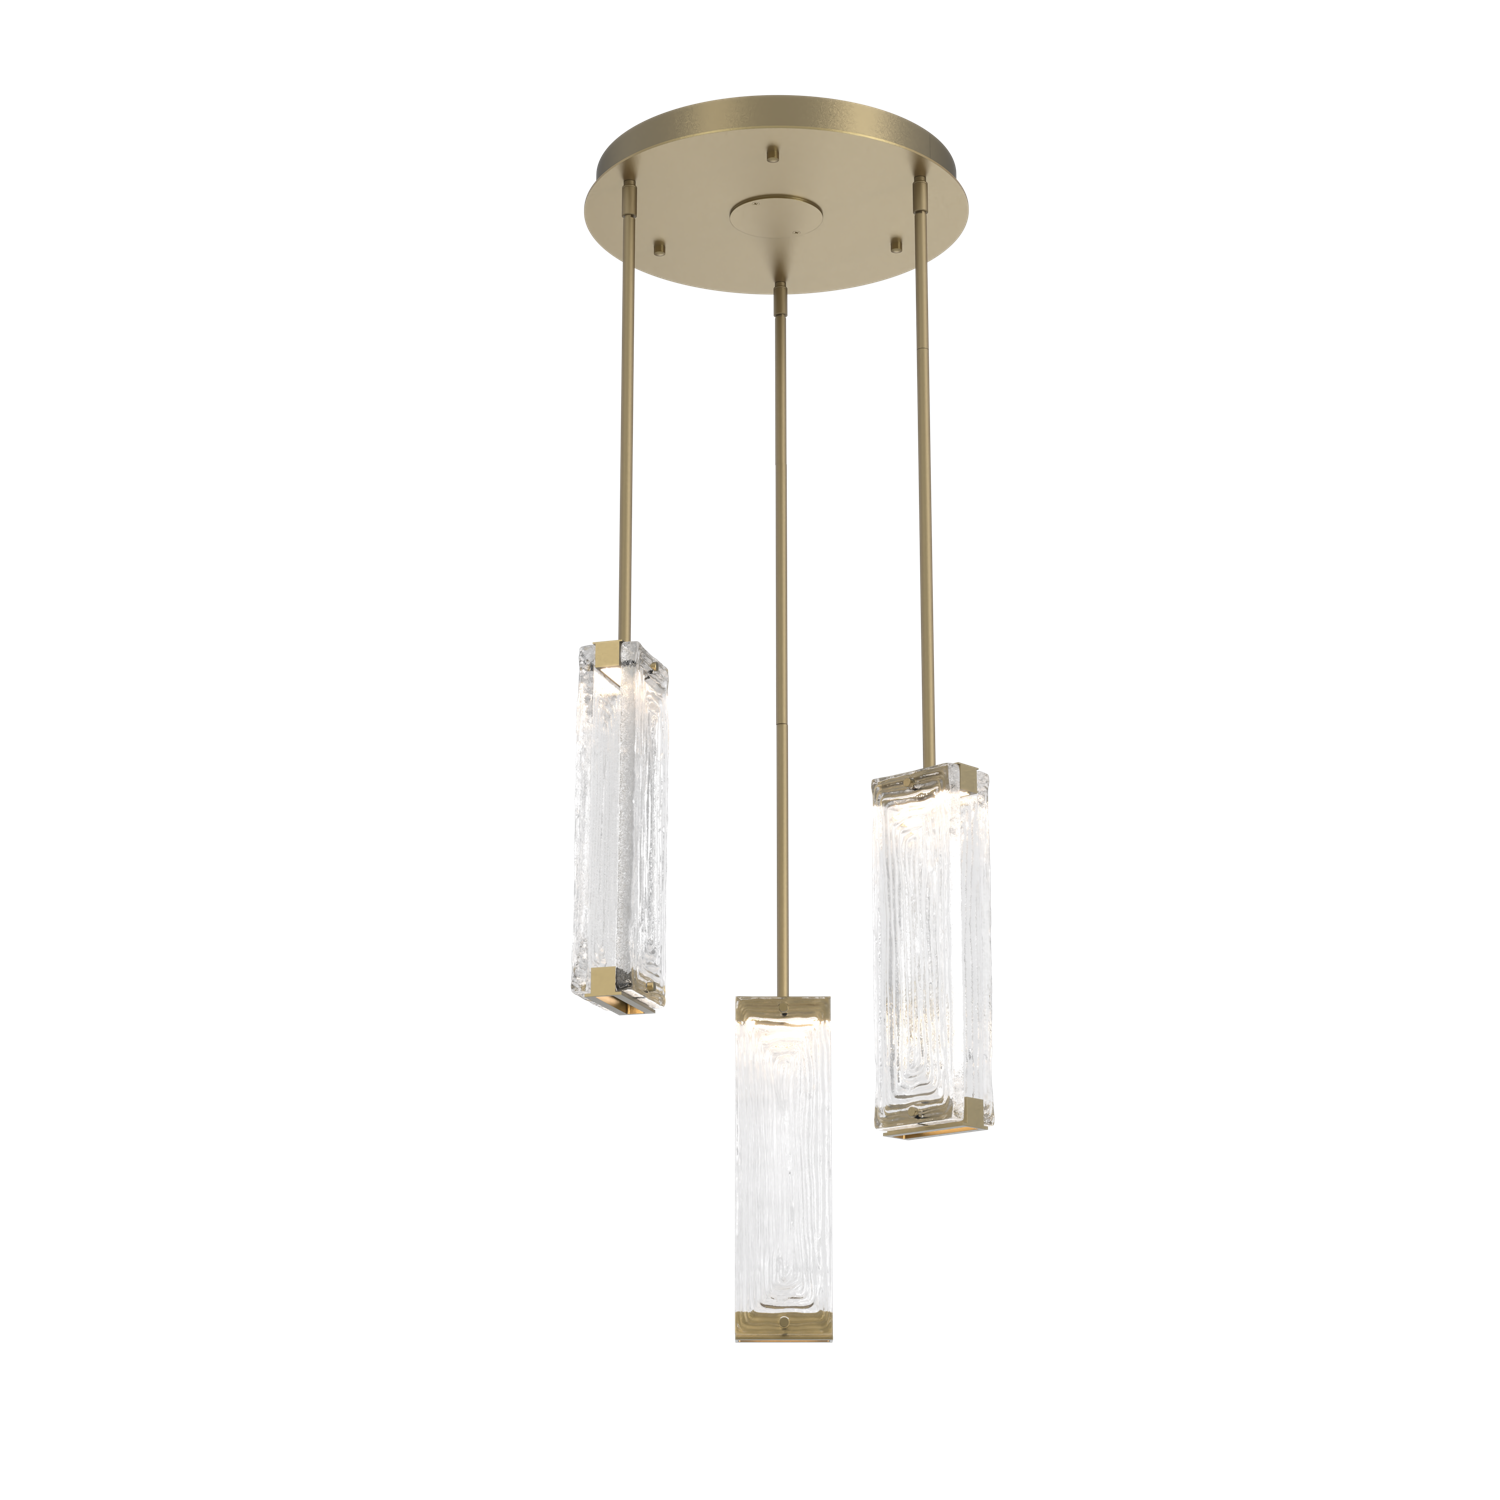 CHB0090-03-GB-TL-Hammerton-Studio-Tabulo-3-light-multi-pendant-chandelier-with-gilded-brass-finish-and-clear-linea-cast-glass-shade-and-LED-lamping